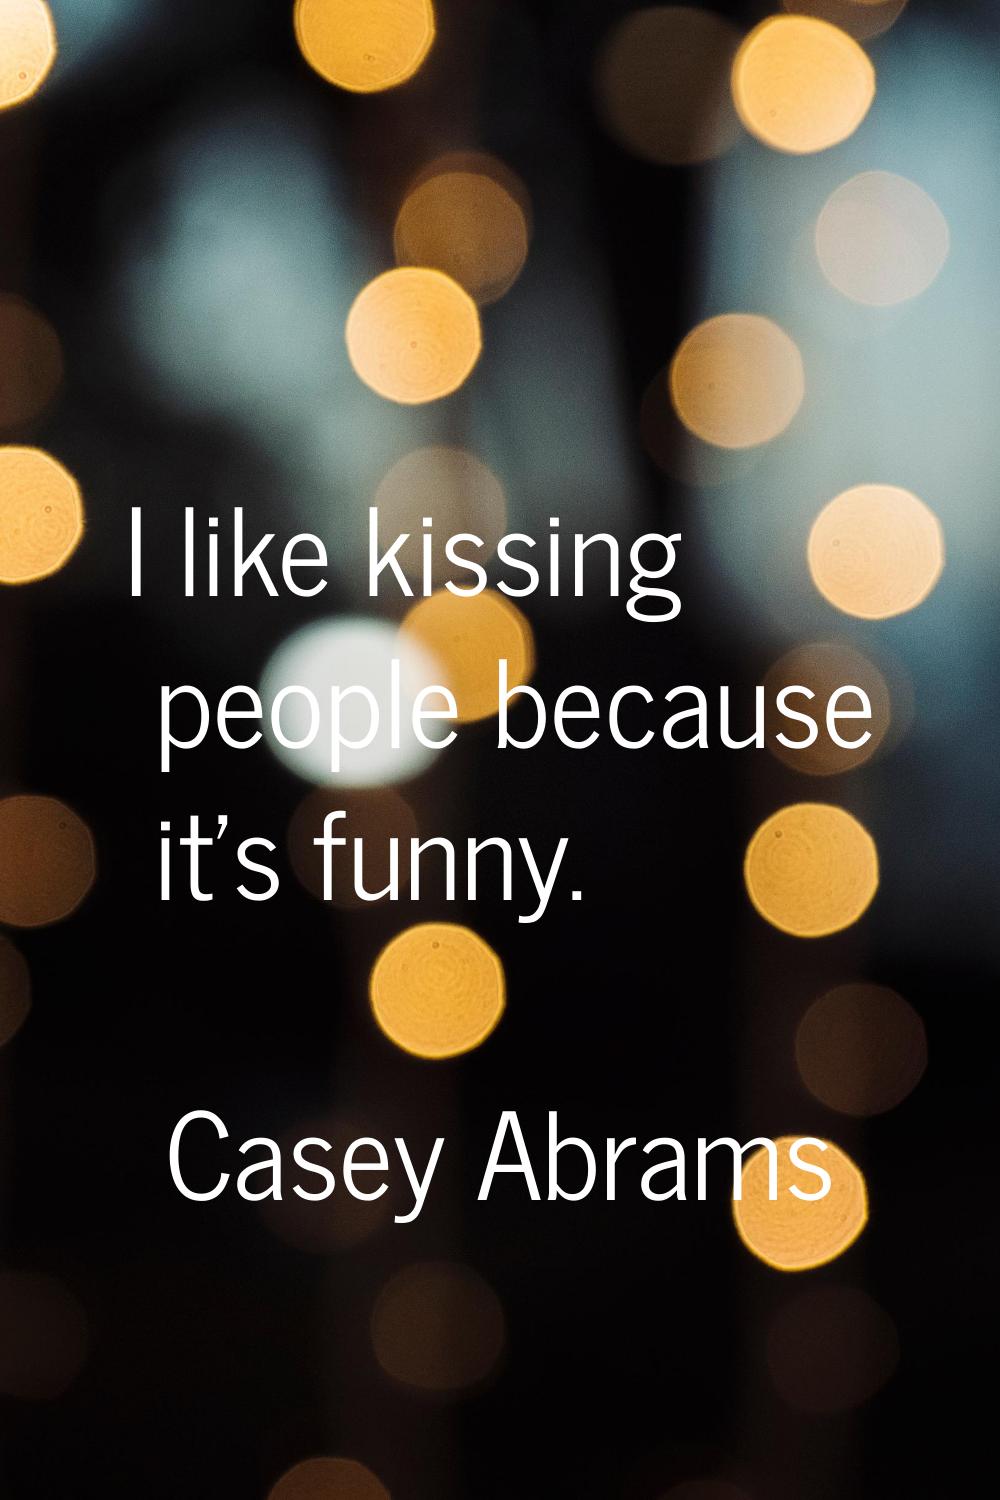 I like kissing people because it's funny.